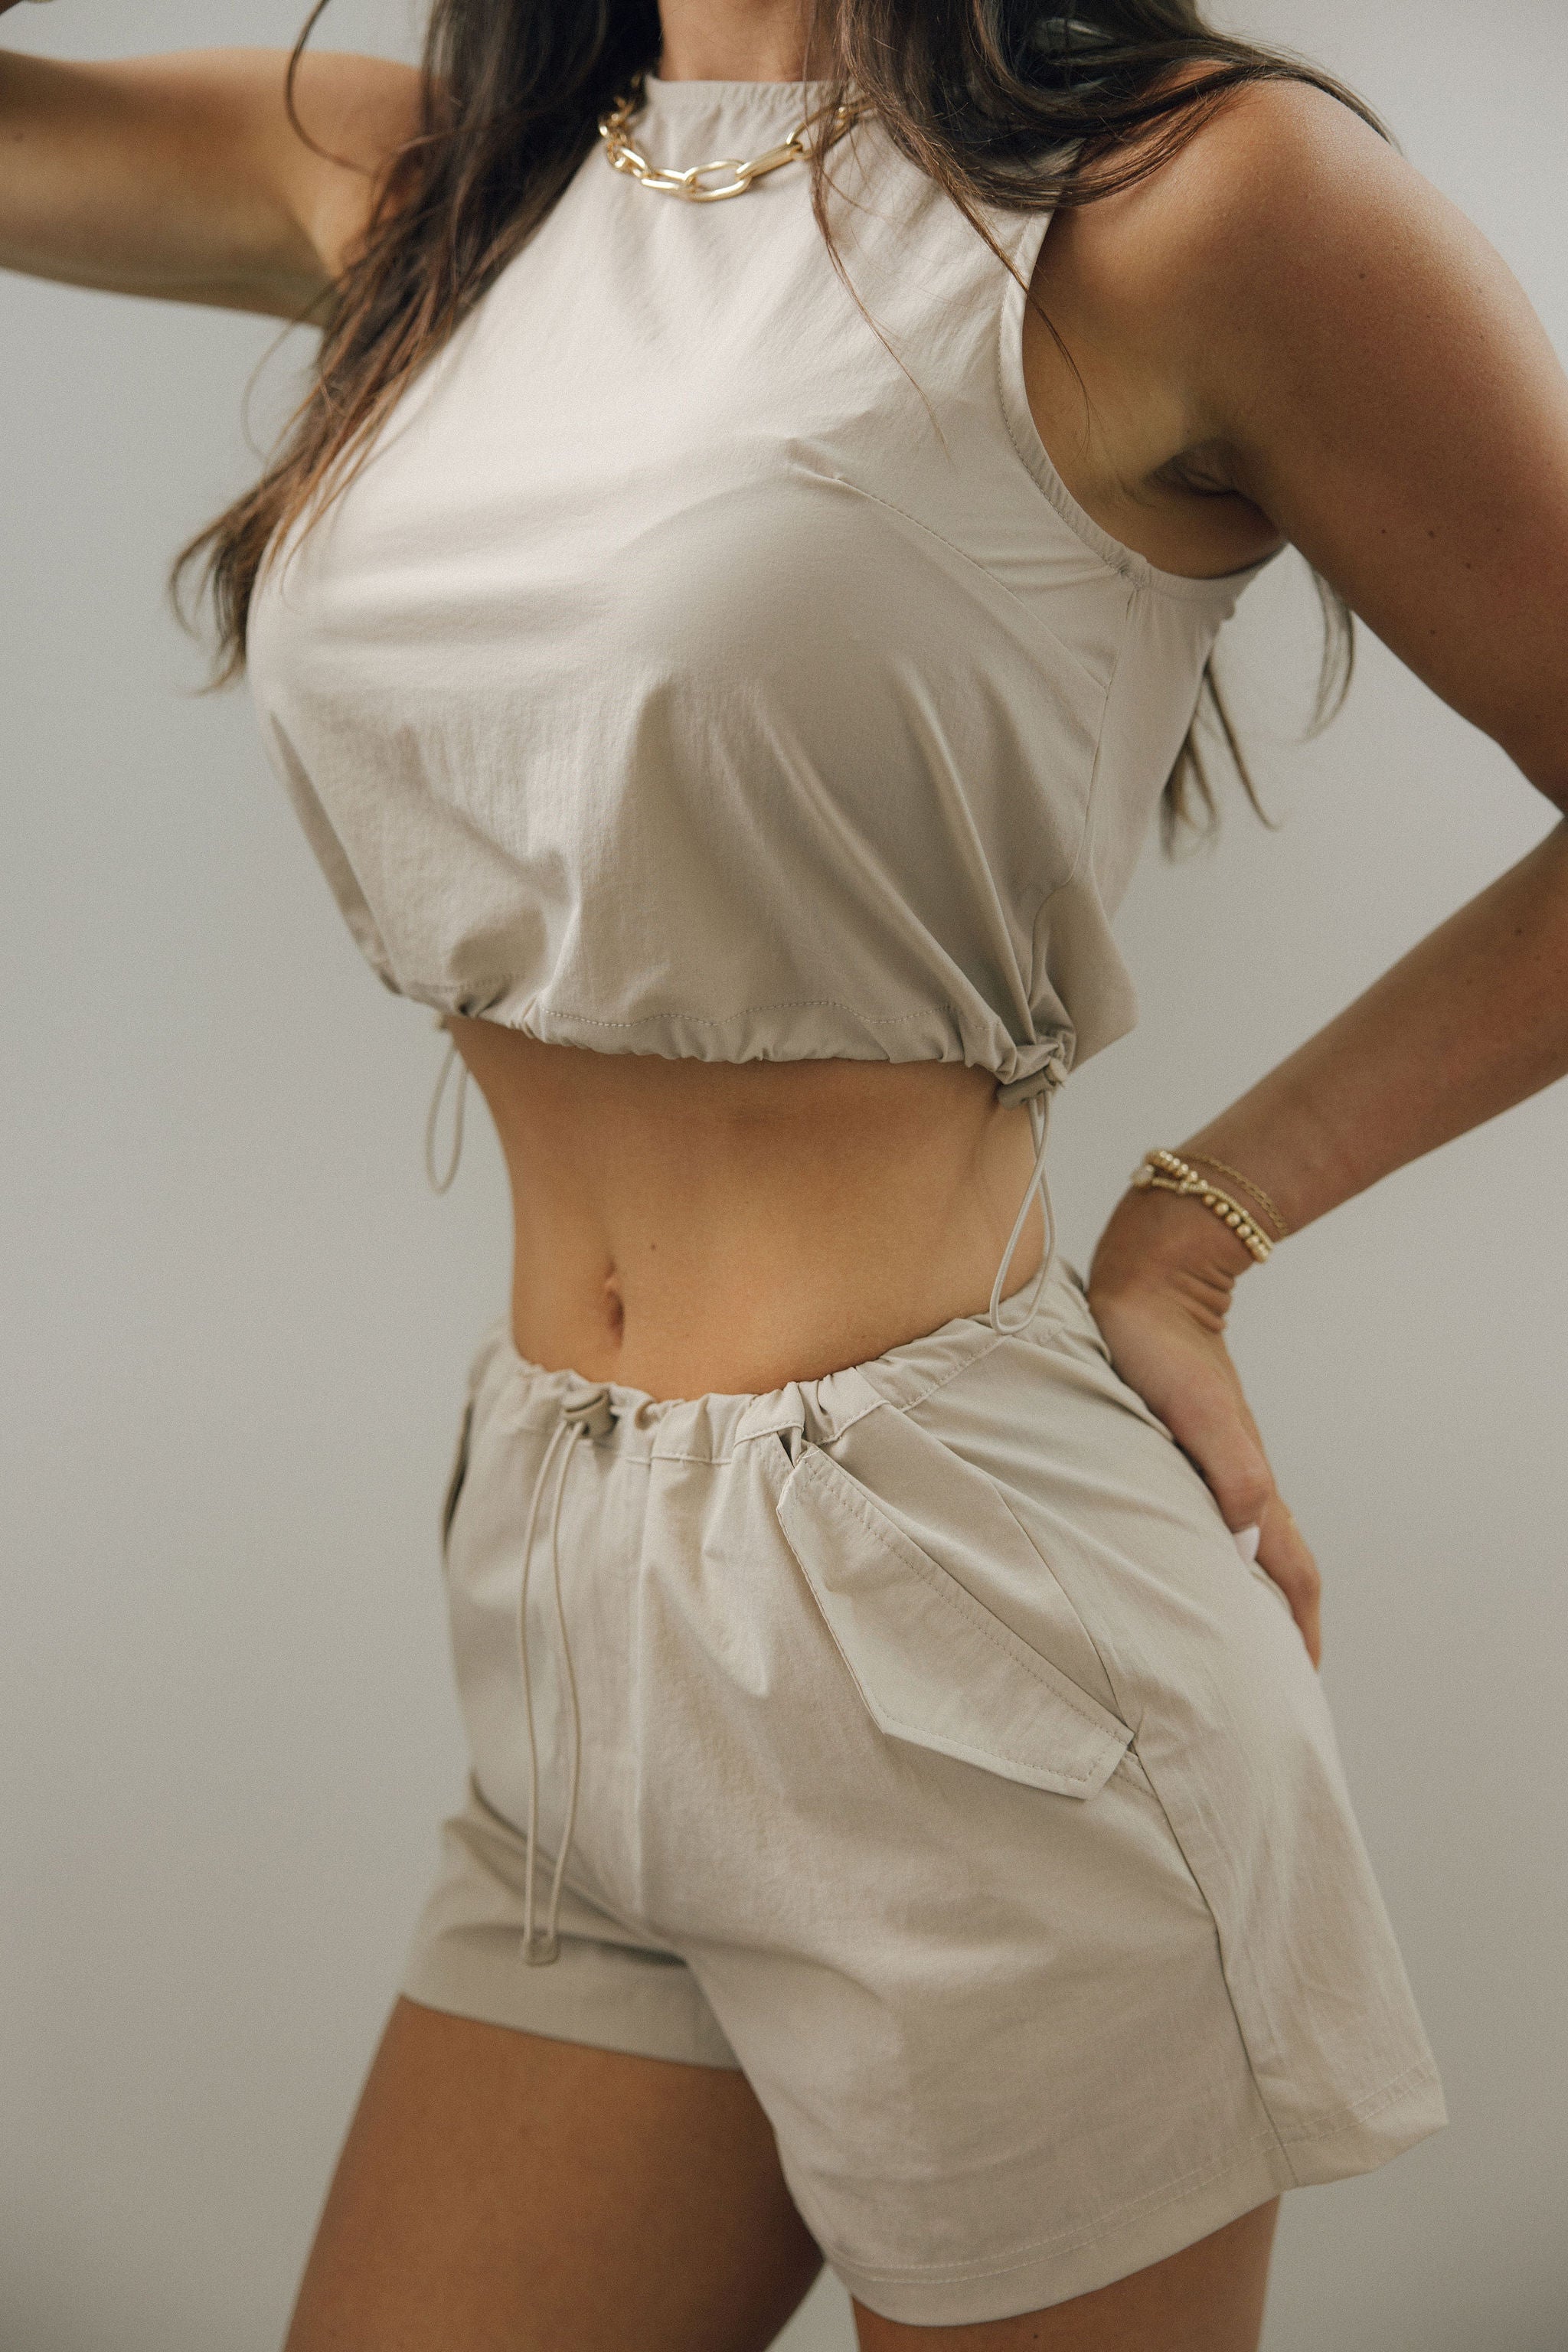 Close up side view of female model wearing the Ari Light Taupe Drawstring Shorts which feature Light Taupe Lightweight Fabric, Two Side Pockets and Adjustable Drawstring Waistband